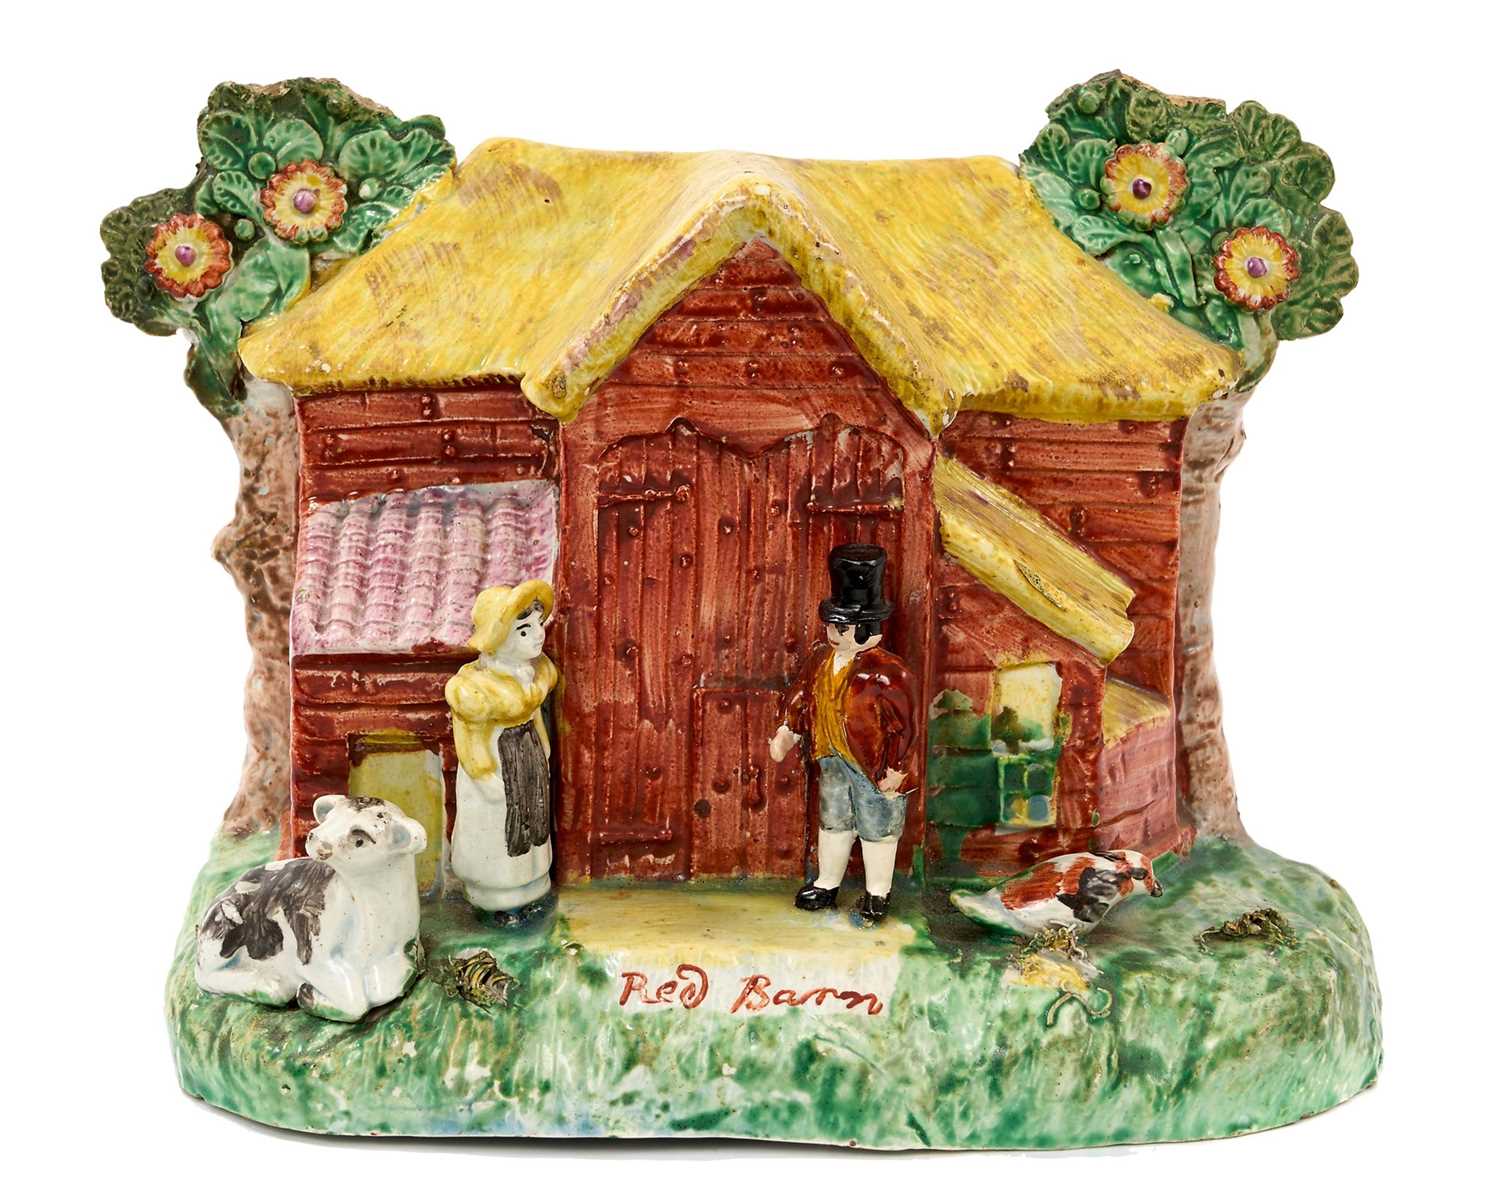 Extremely rare 19th century Staffordshire model of the Red Barn at Polstead